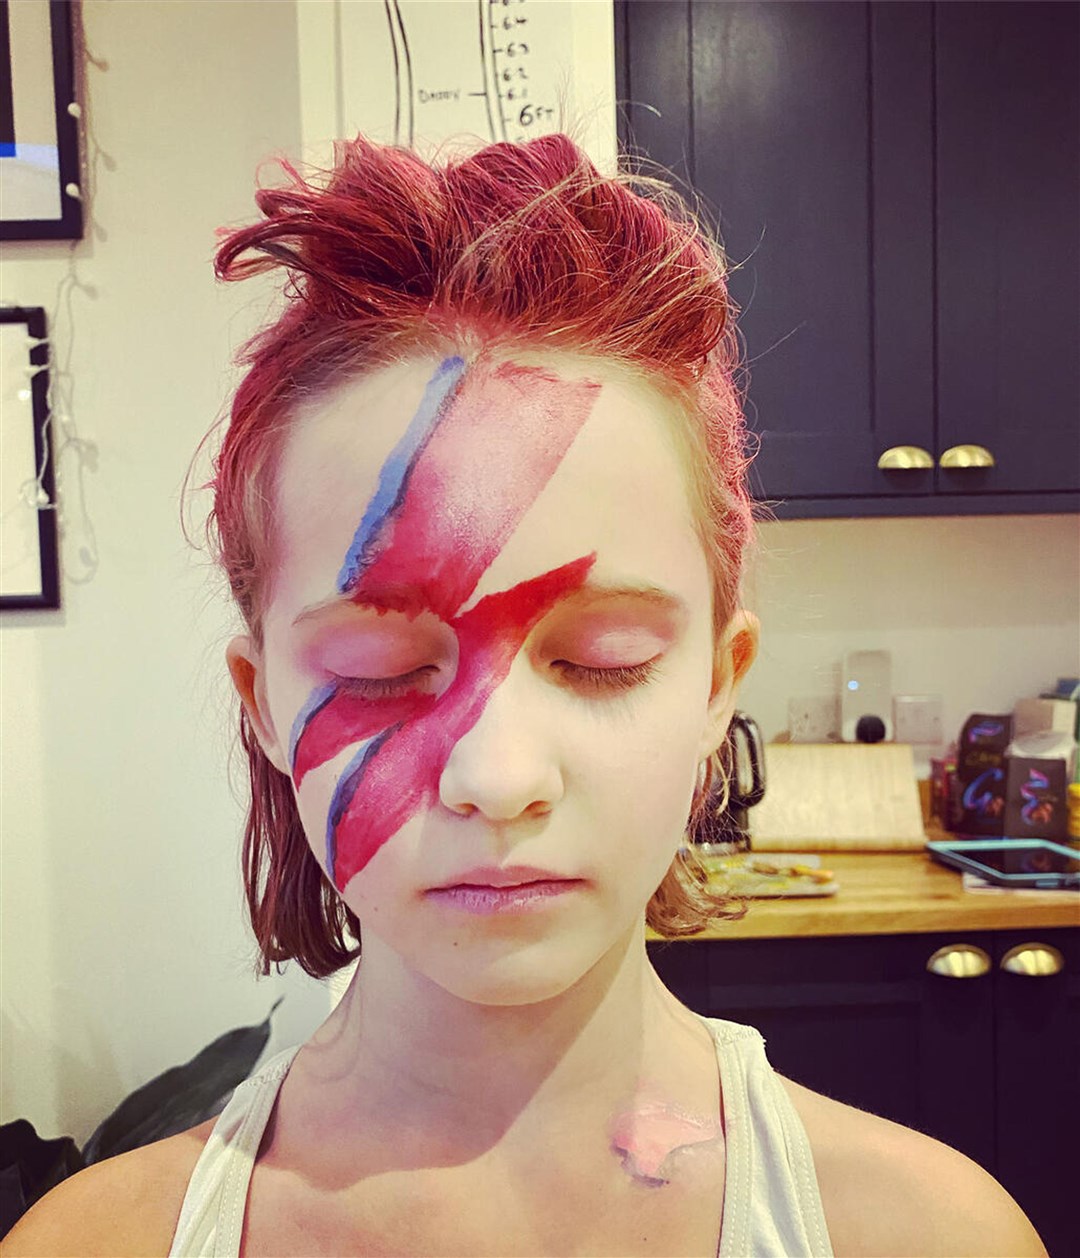 Pearl Parkin as David Bowie (Save the Children/PA)